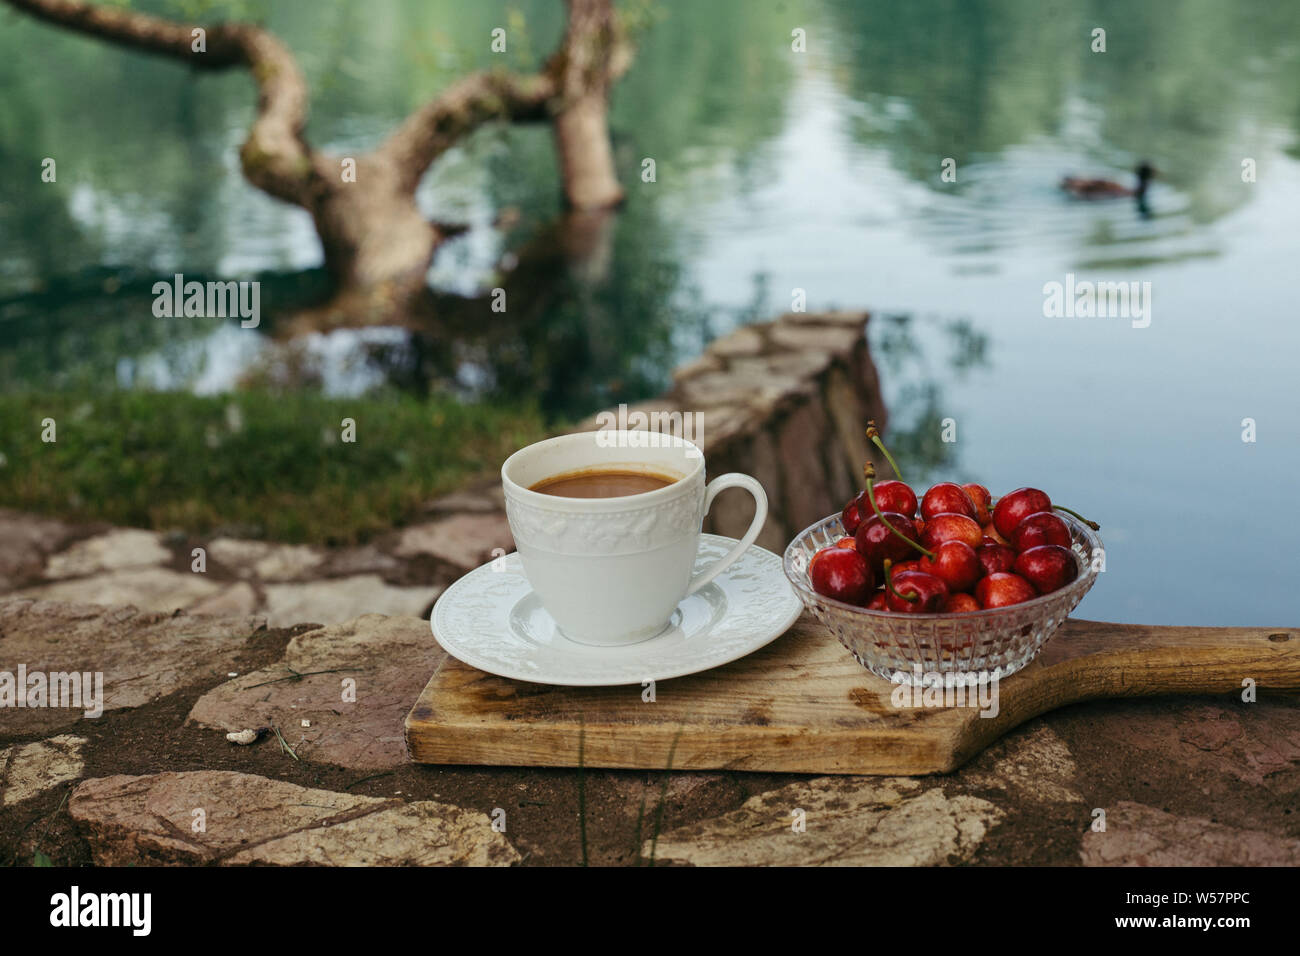 Cup of coffee on cutting board in nature Stock Photo -